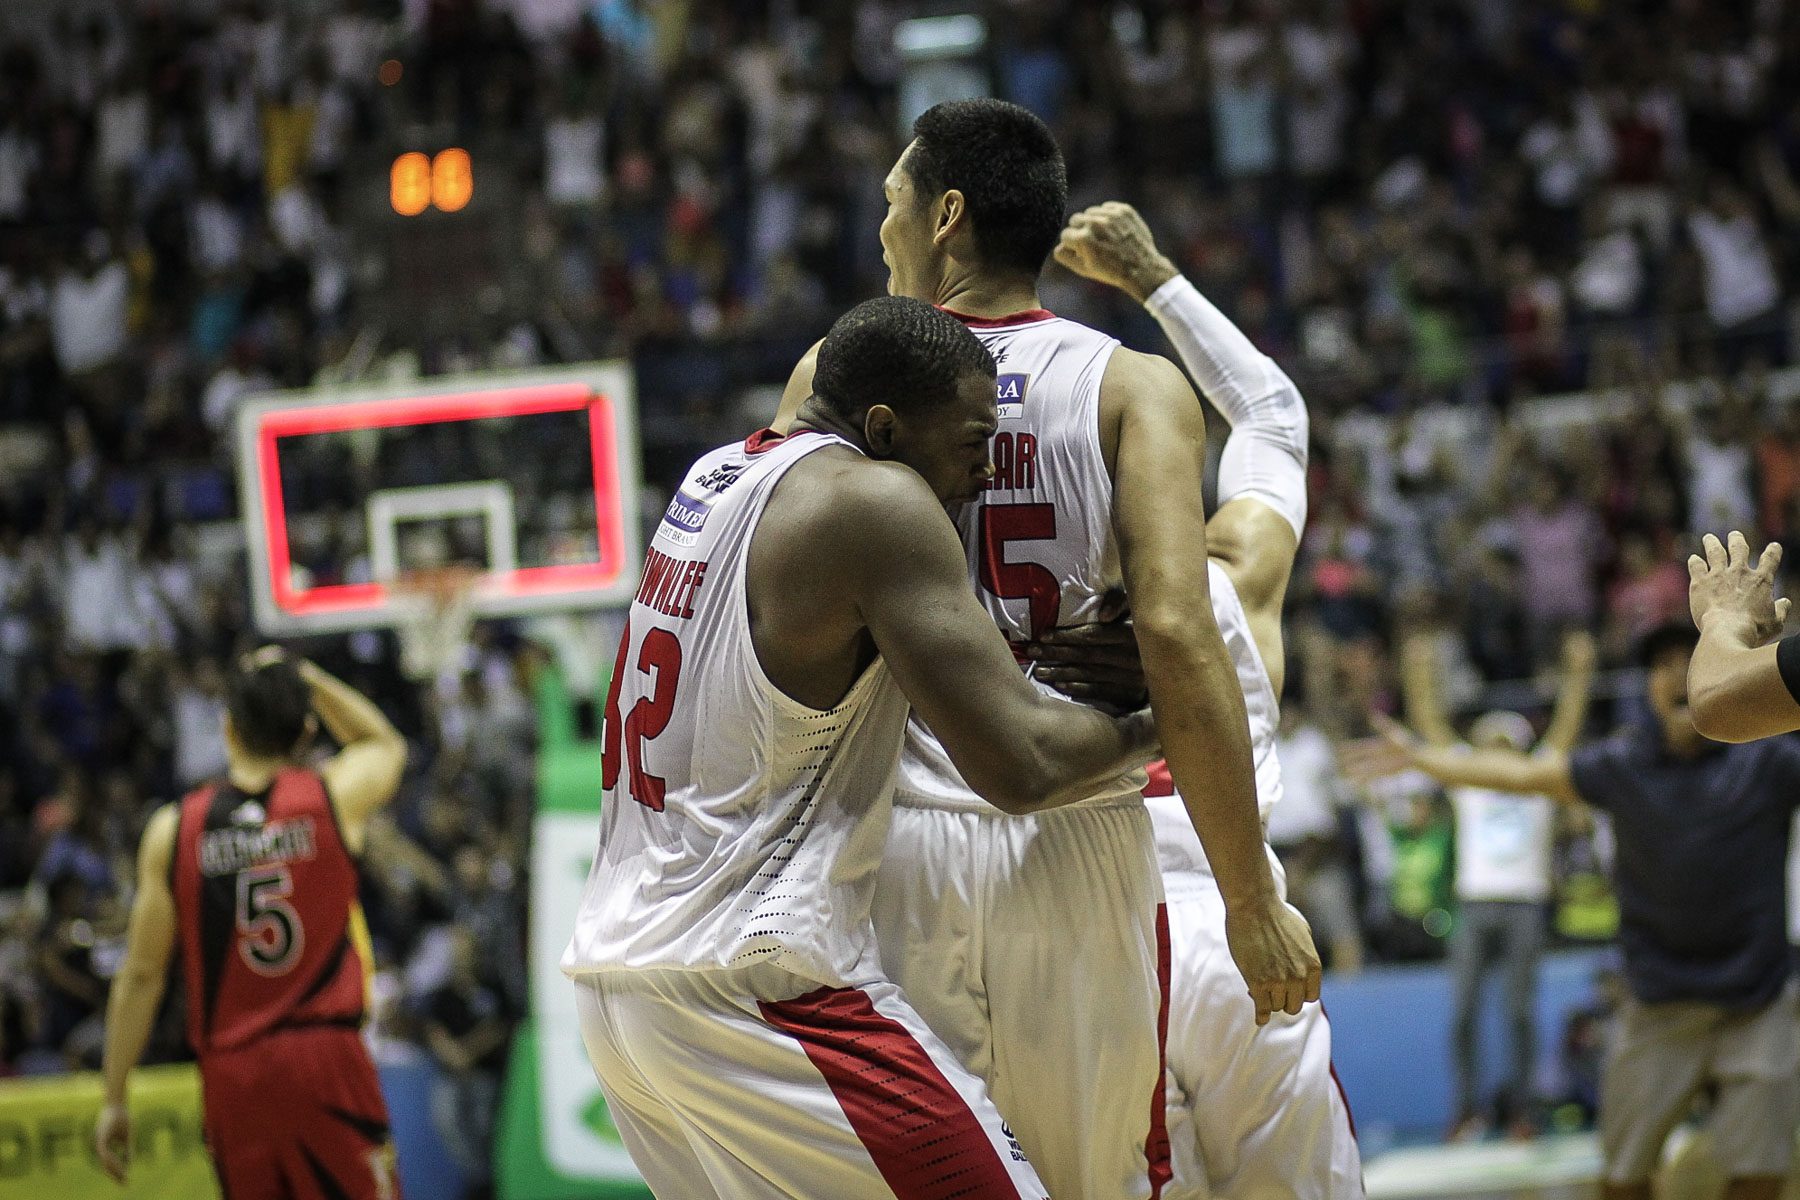 WATCH: Aguilar saves the day for Ginebra